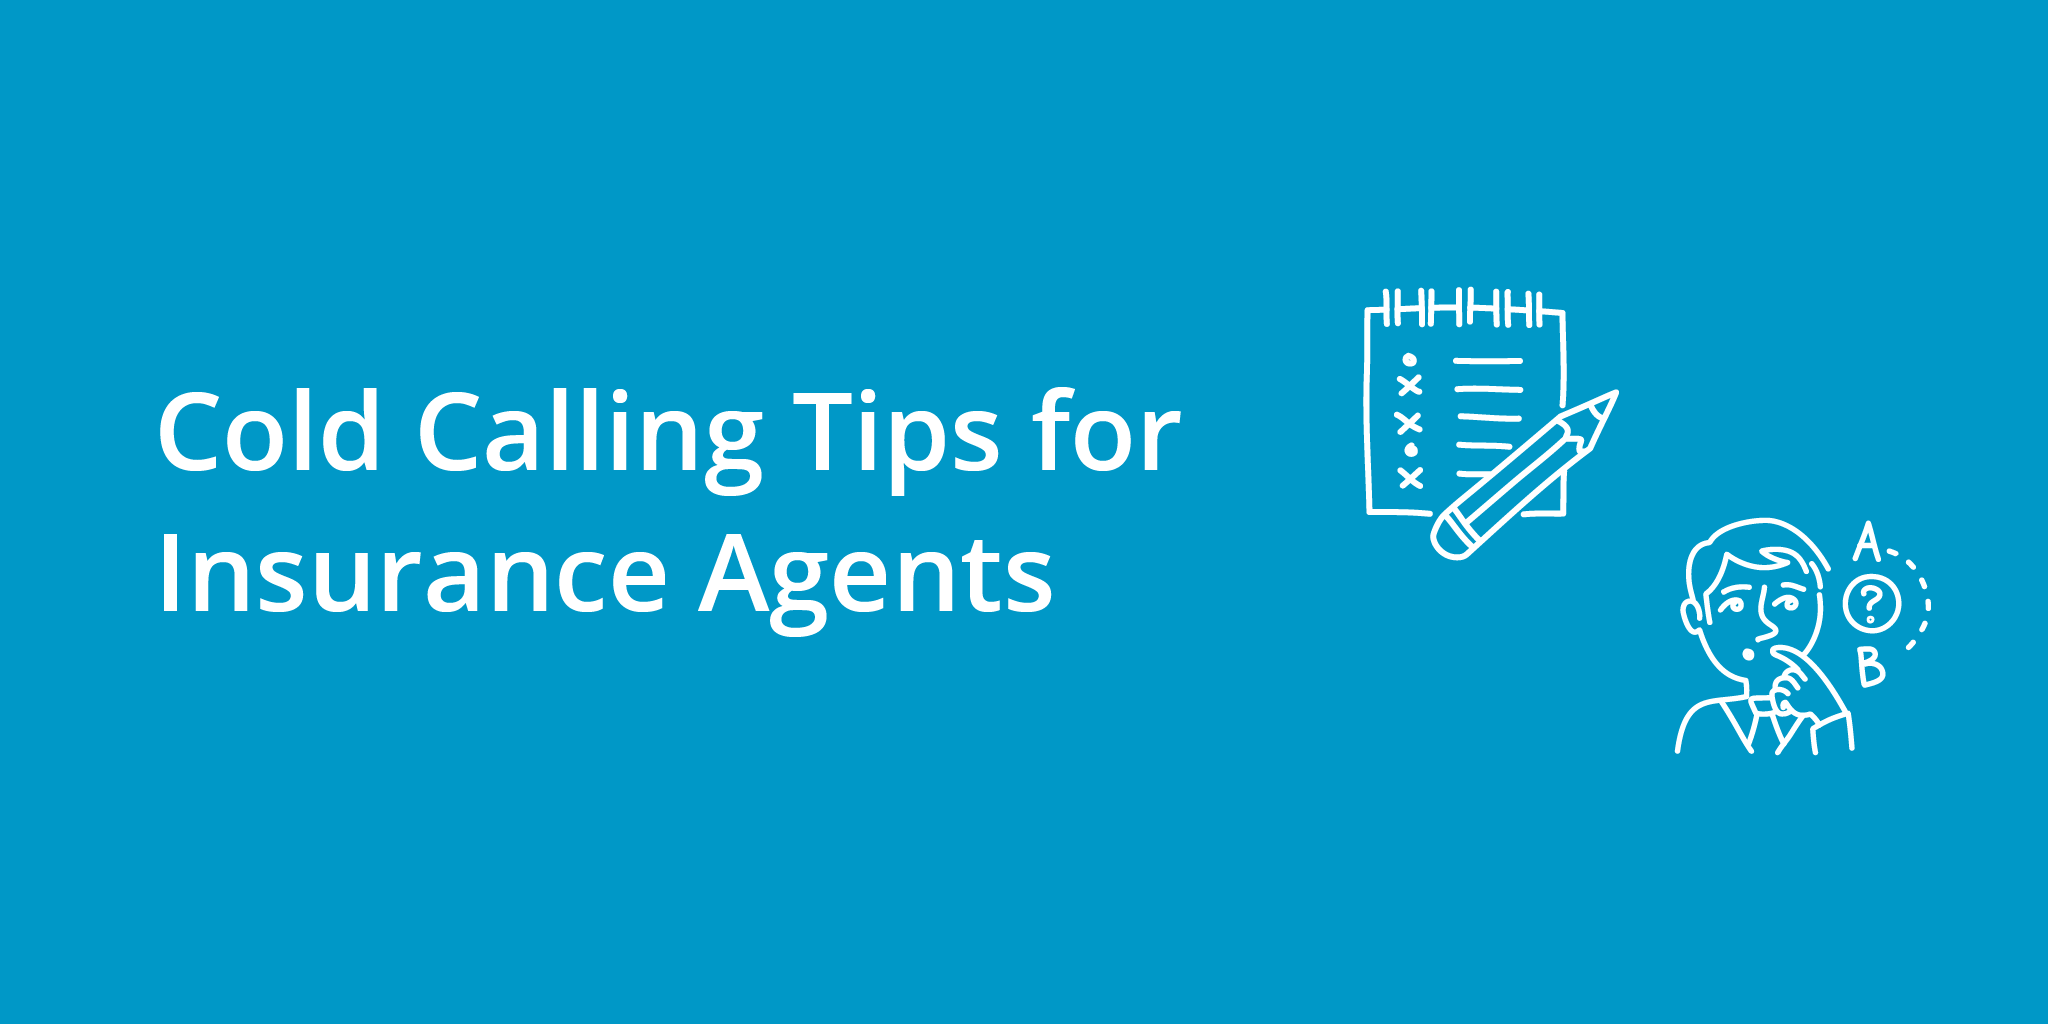 Cold Calling Tips for Insurance Agents | Telephones for business